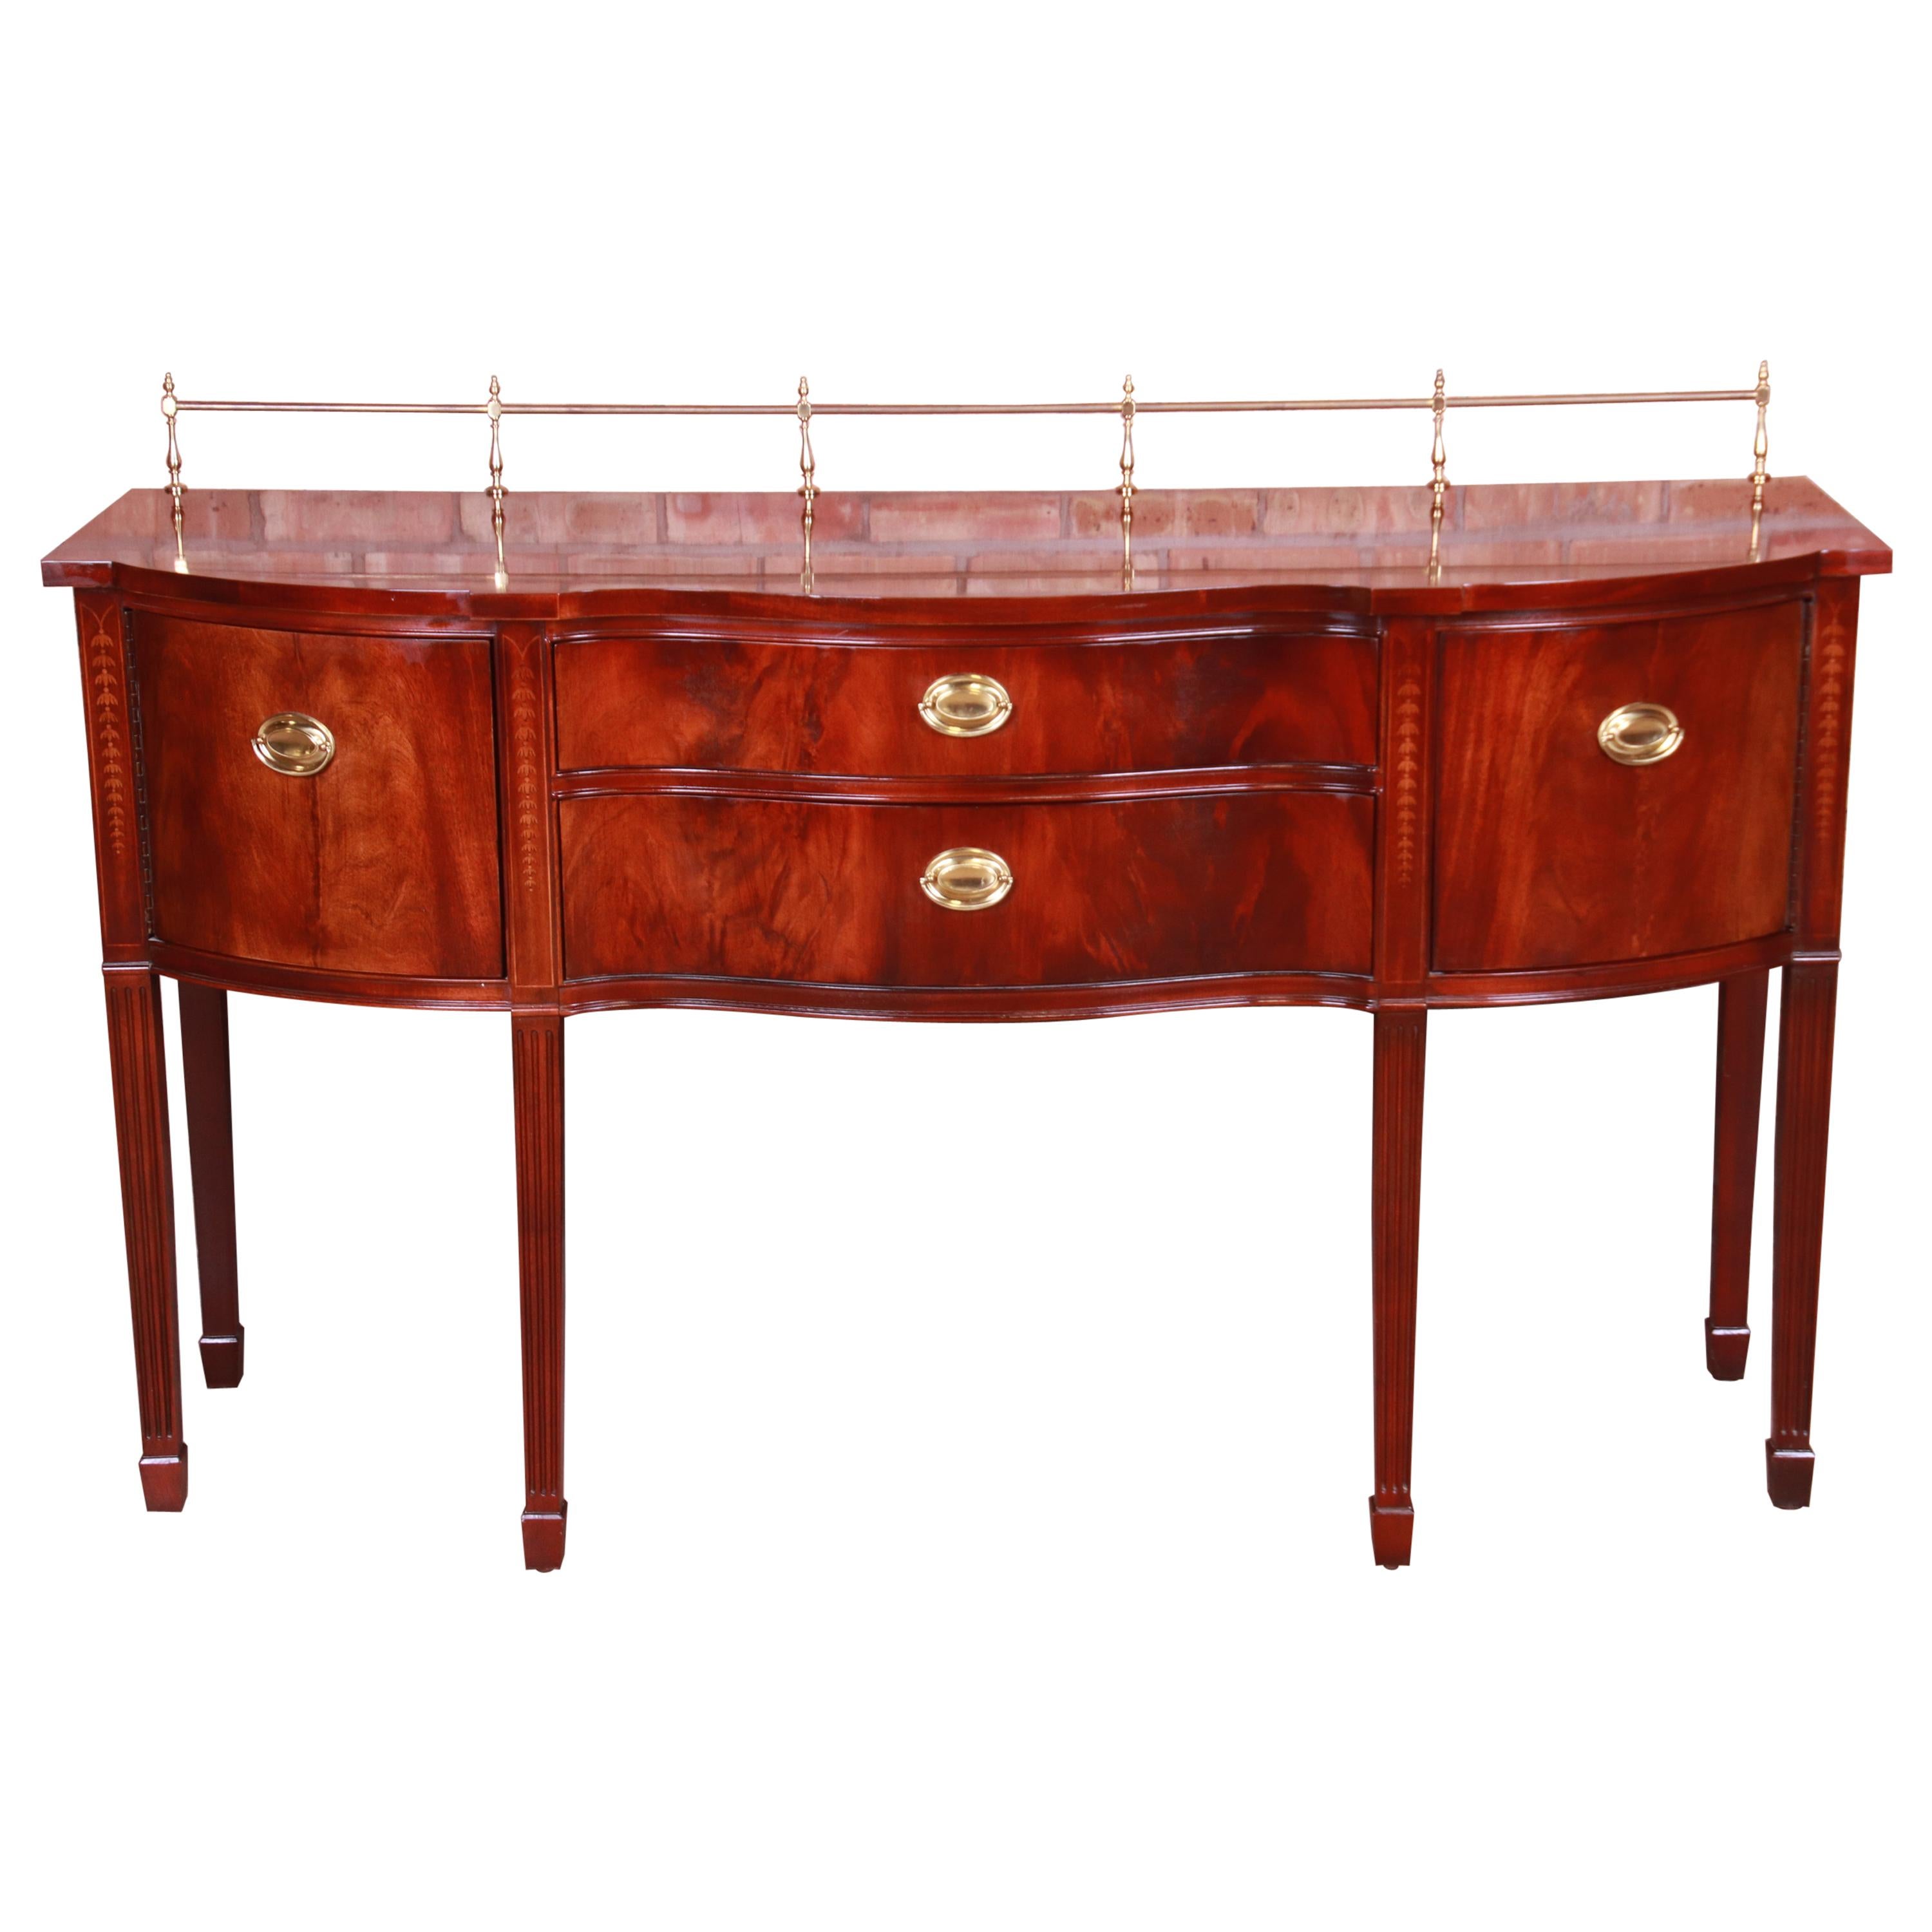 Thomasville Hepplewhite Flame Mahogany Sideboard Credenza with Brass Gallery